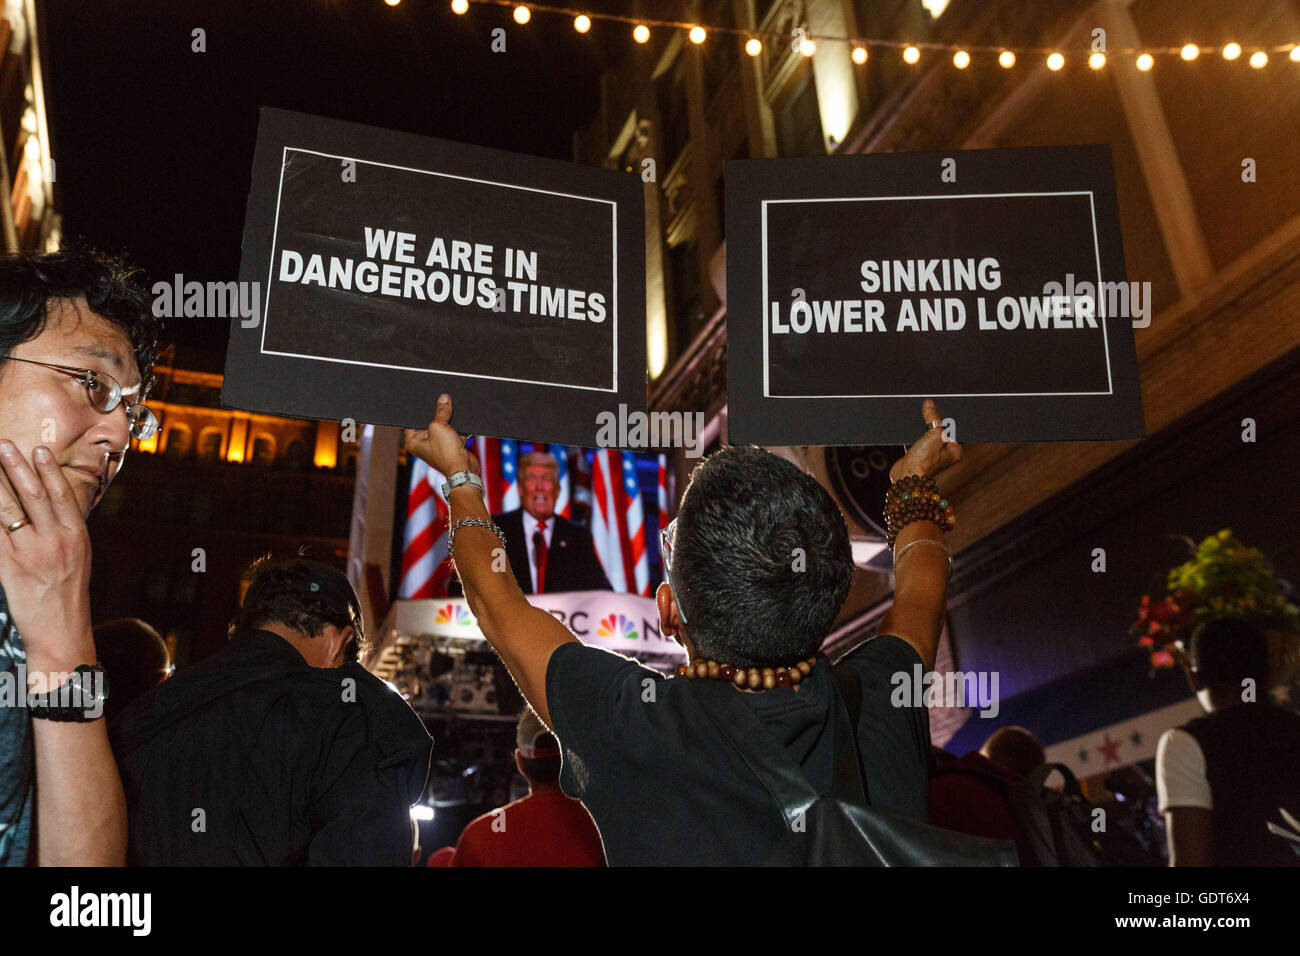 Cleveland, Ohio, USA. 21st July, 2016. Cleveland, Ohio, USA. 21st July, 2016. Laurie Arbeiter of the group We Will Not Be Silent holds up signs during Trump's telecasted speech outside The Republican National Convention. © John Orvis/Alamy Live News Credit:  John Orvis/Alamy Live News Stock Photo